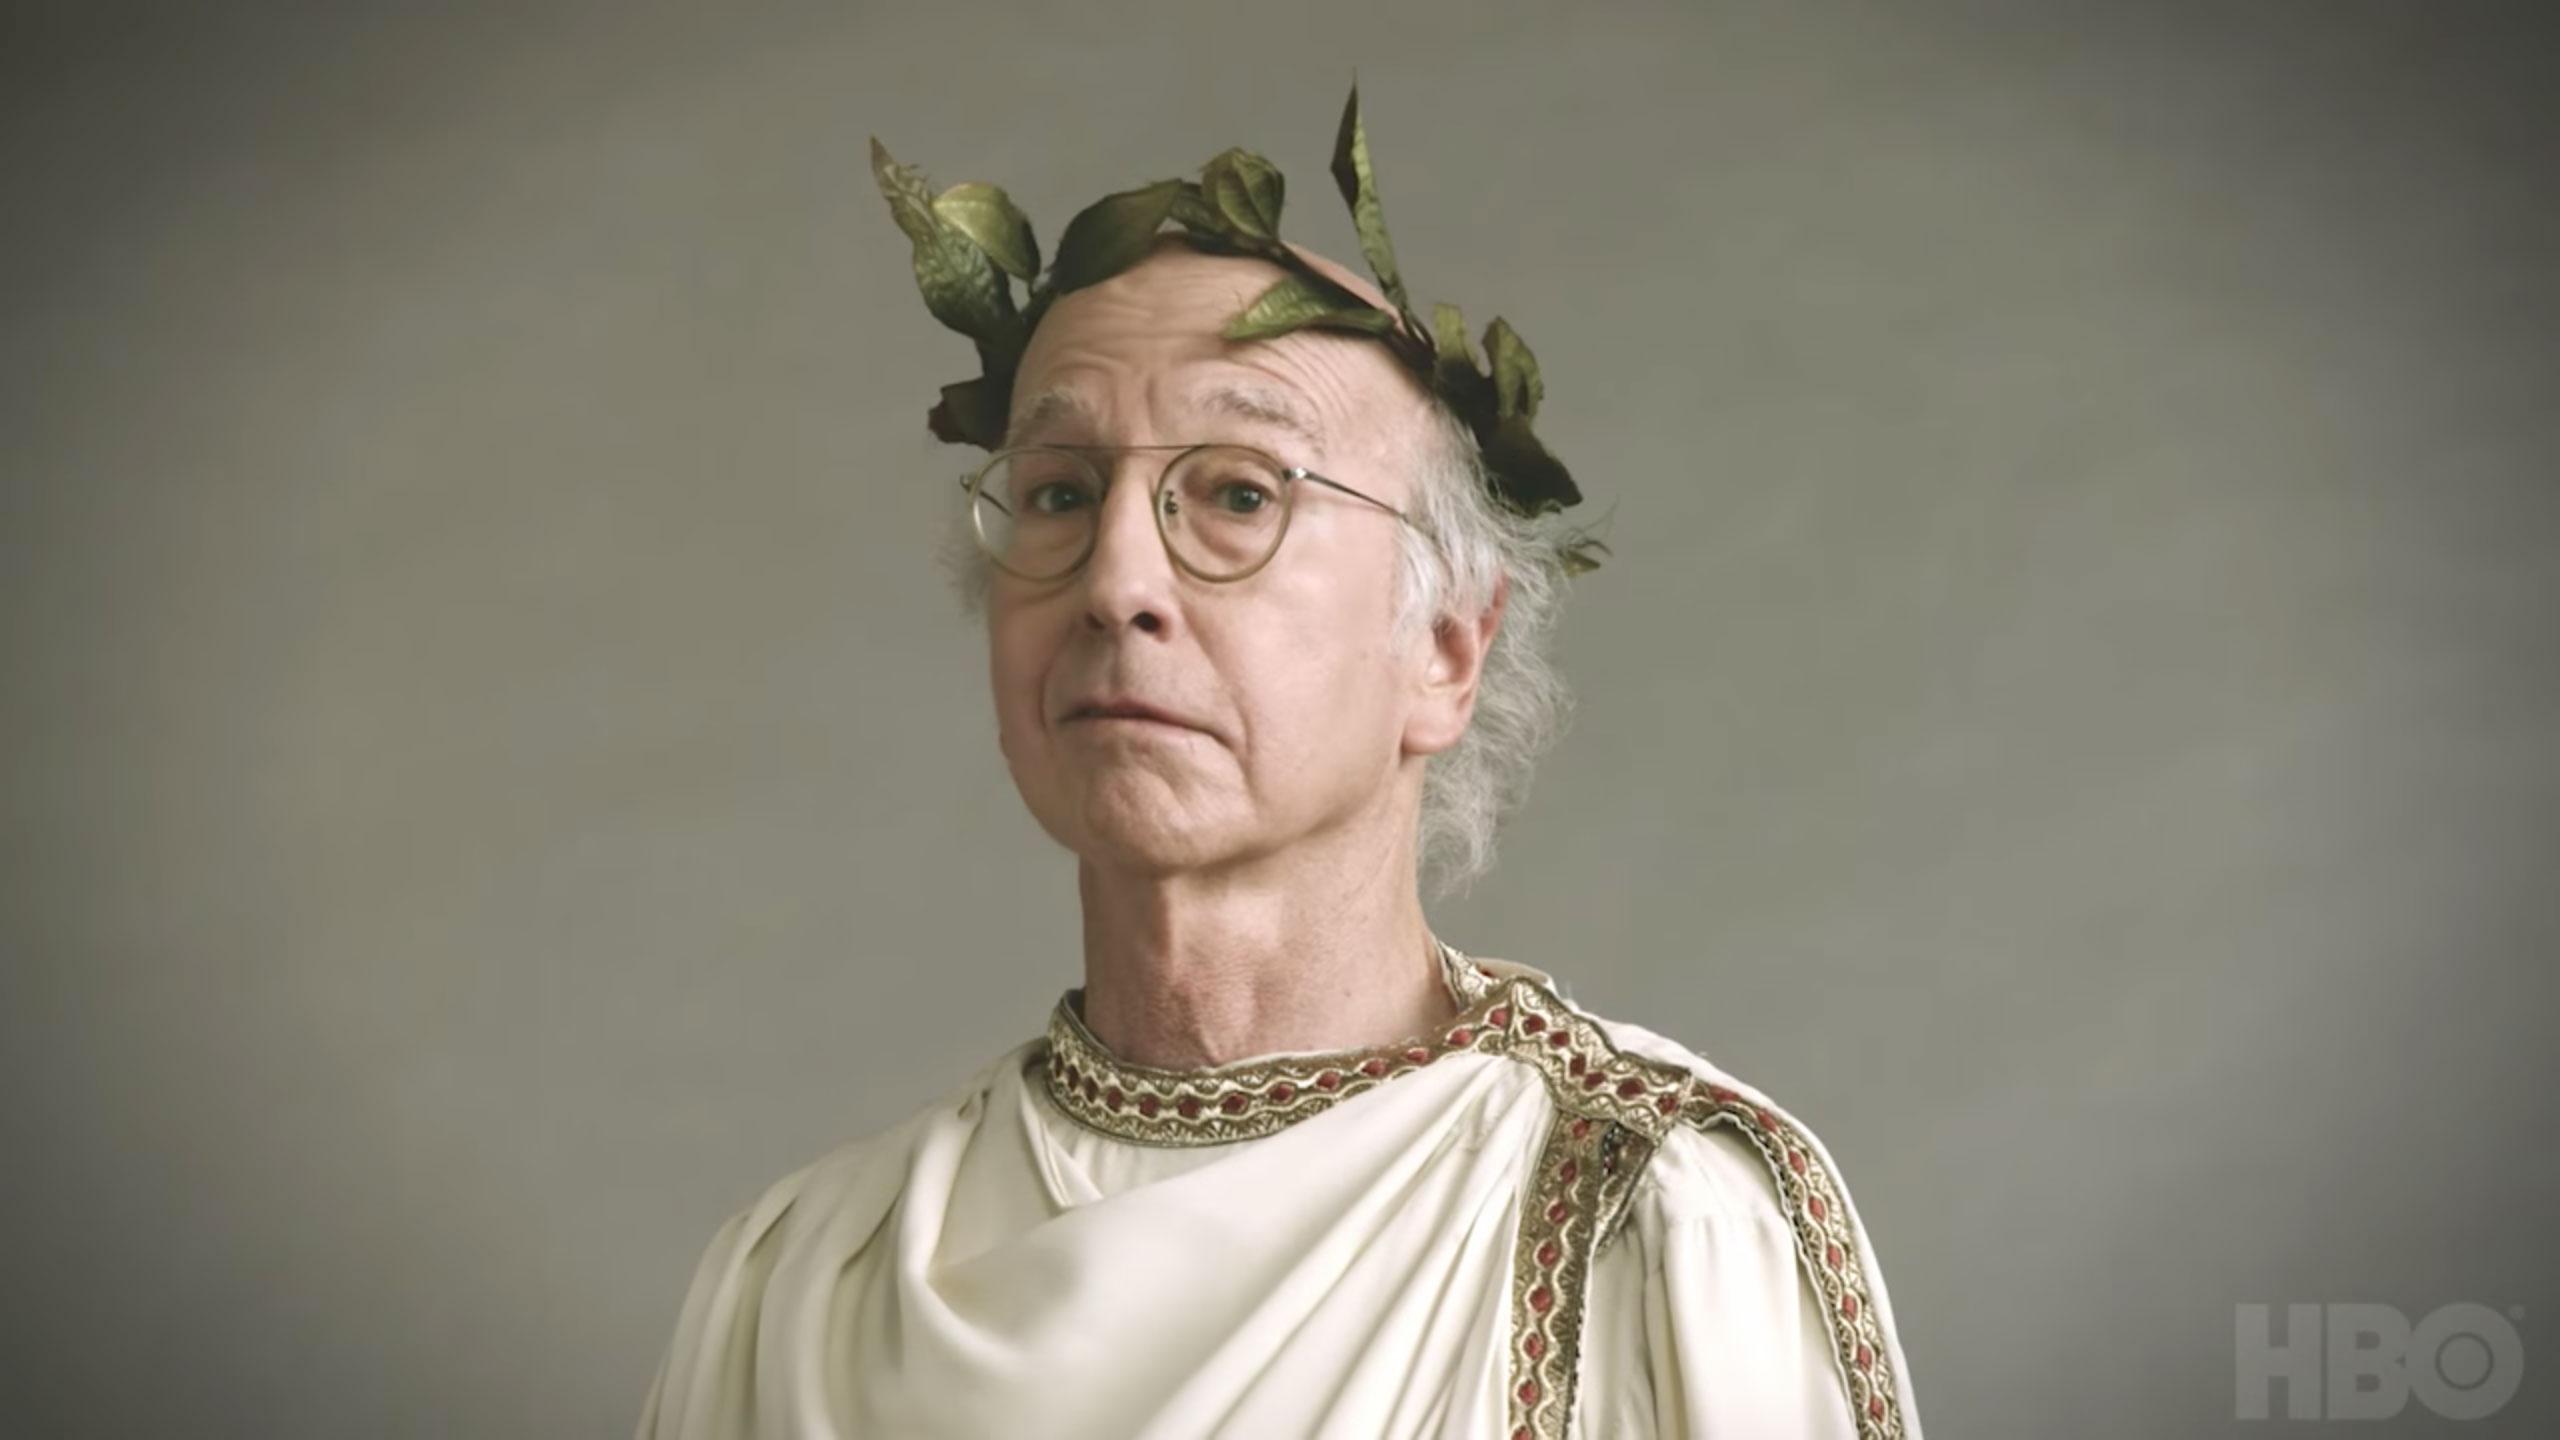 HBO's Curb Your Enthusiasm Announces October 1 Premiere Date